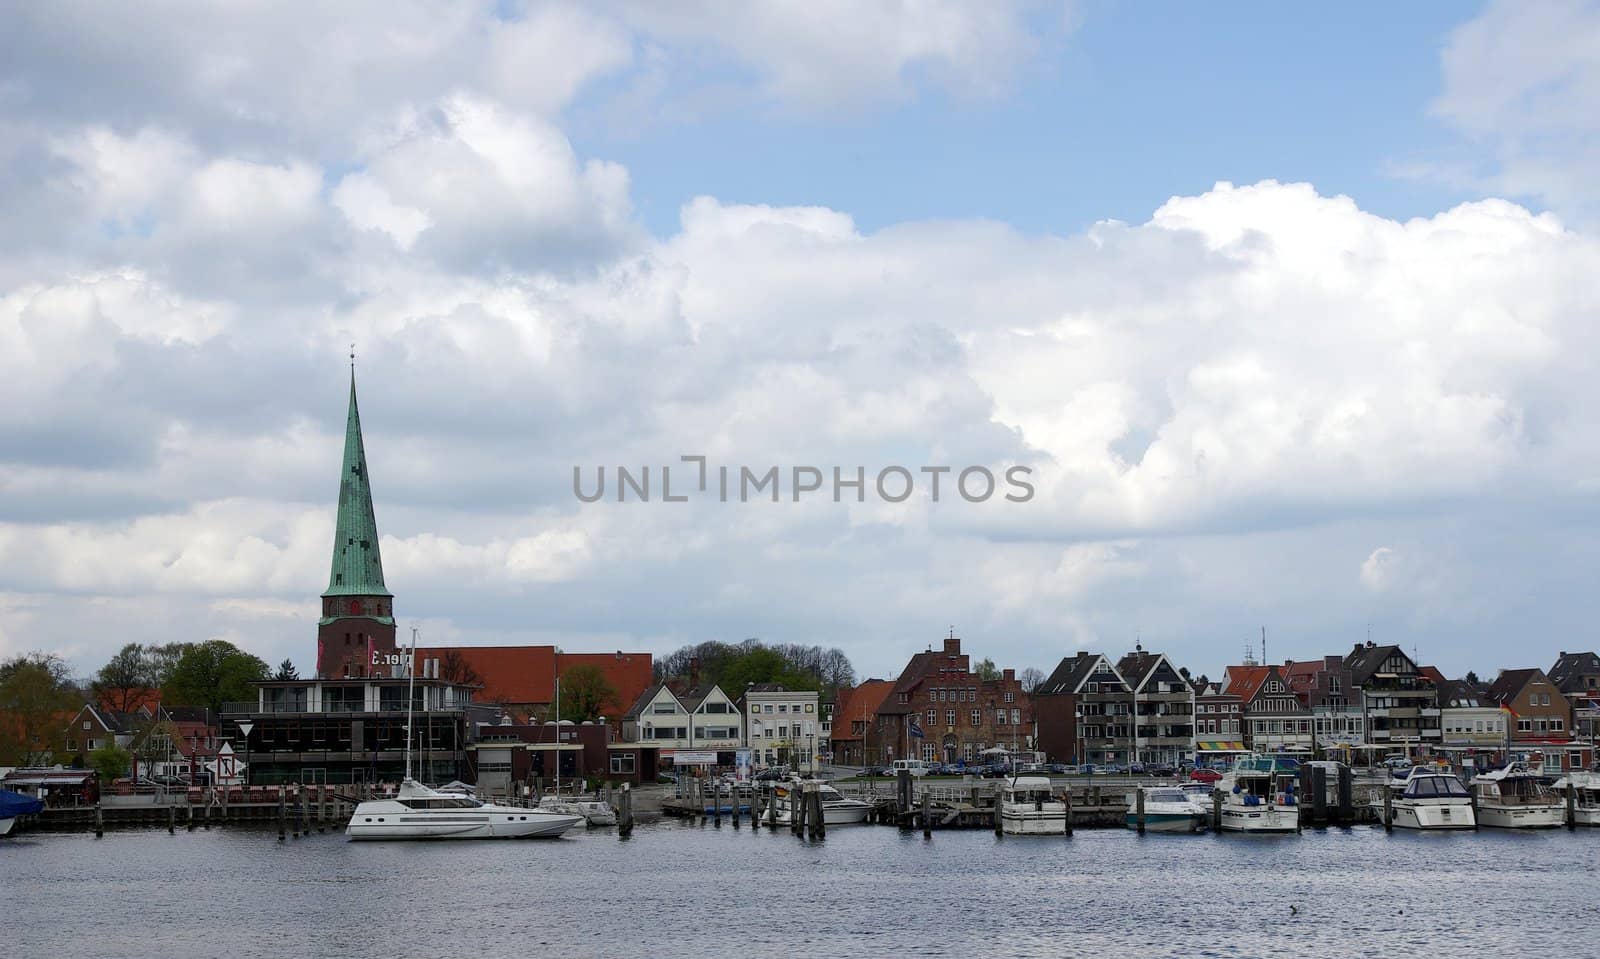 The port and the old town of Travemuende by FotoFrank